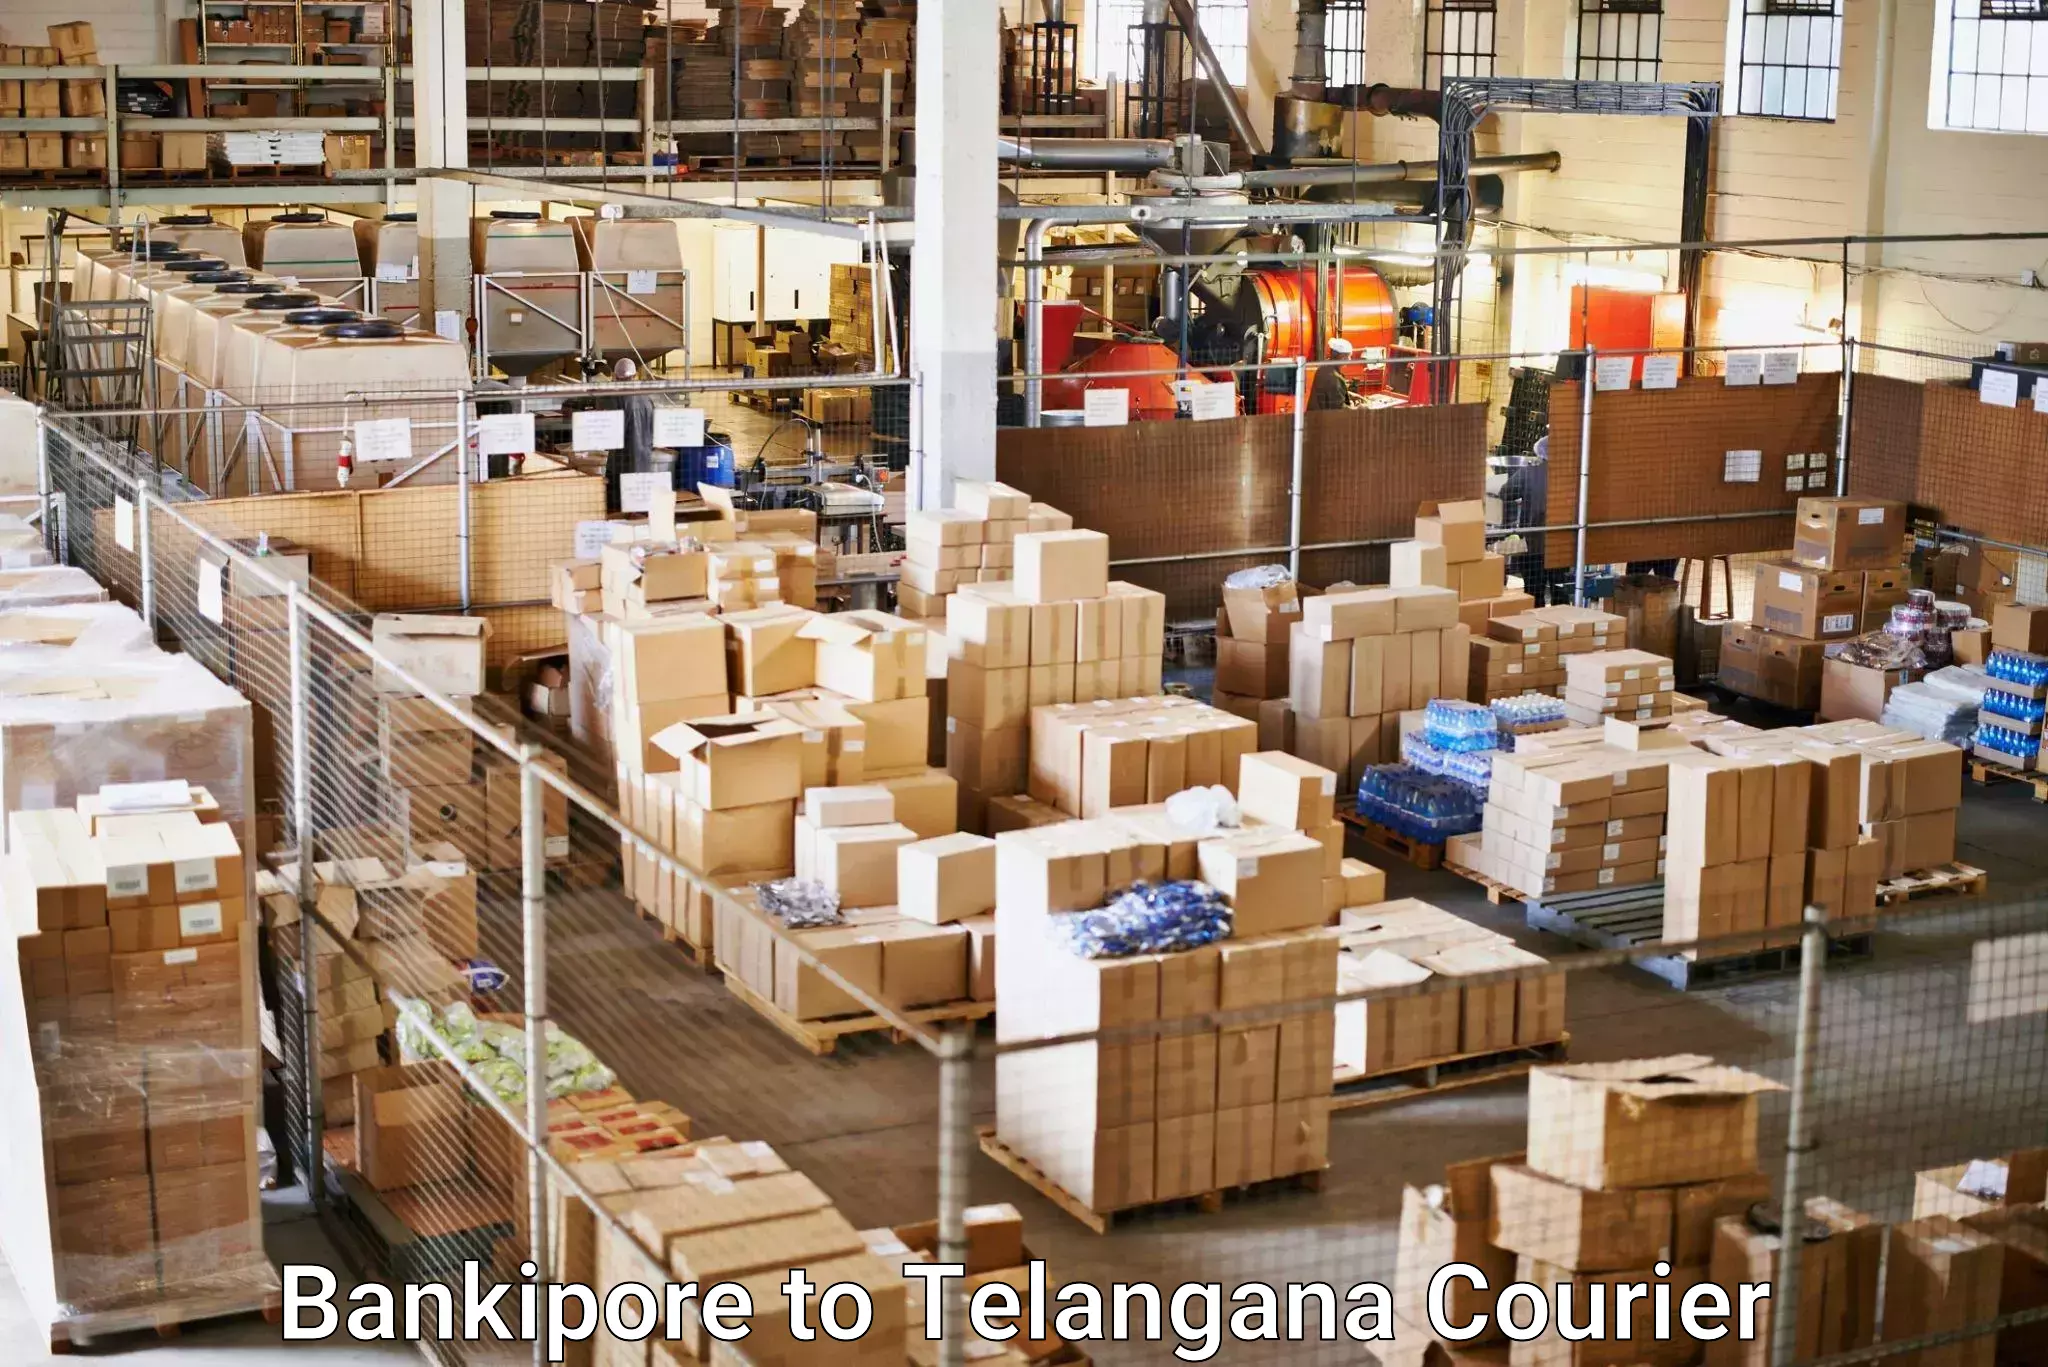 Courier service comparison Bankipore to Telangana